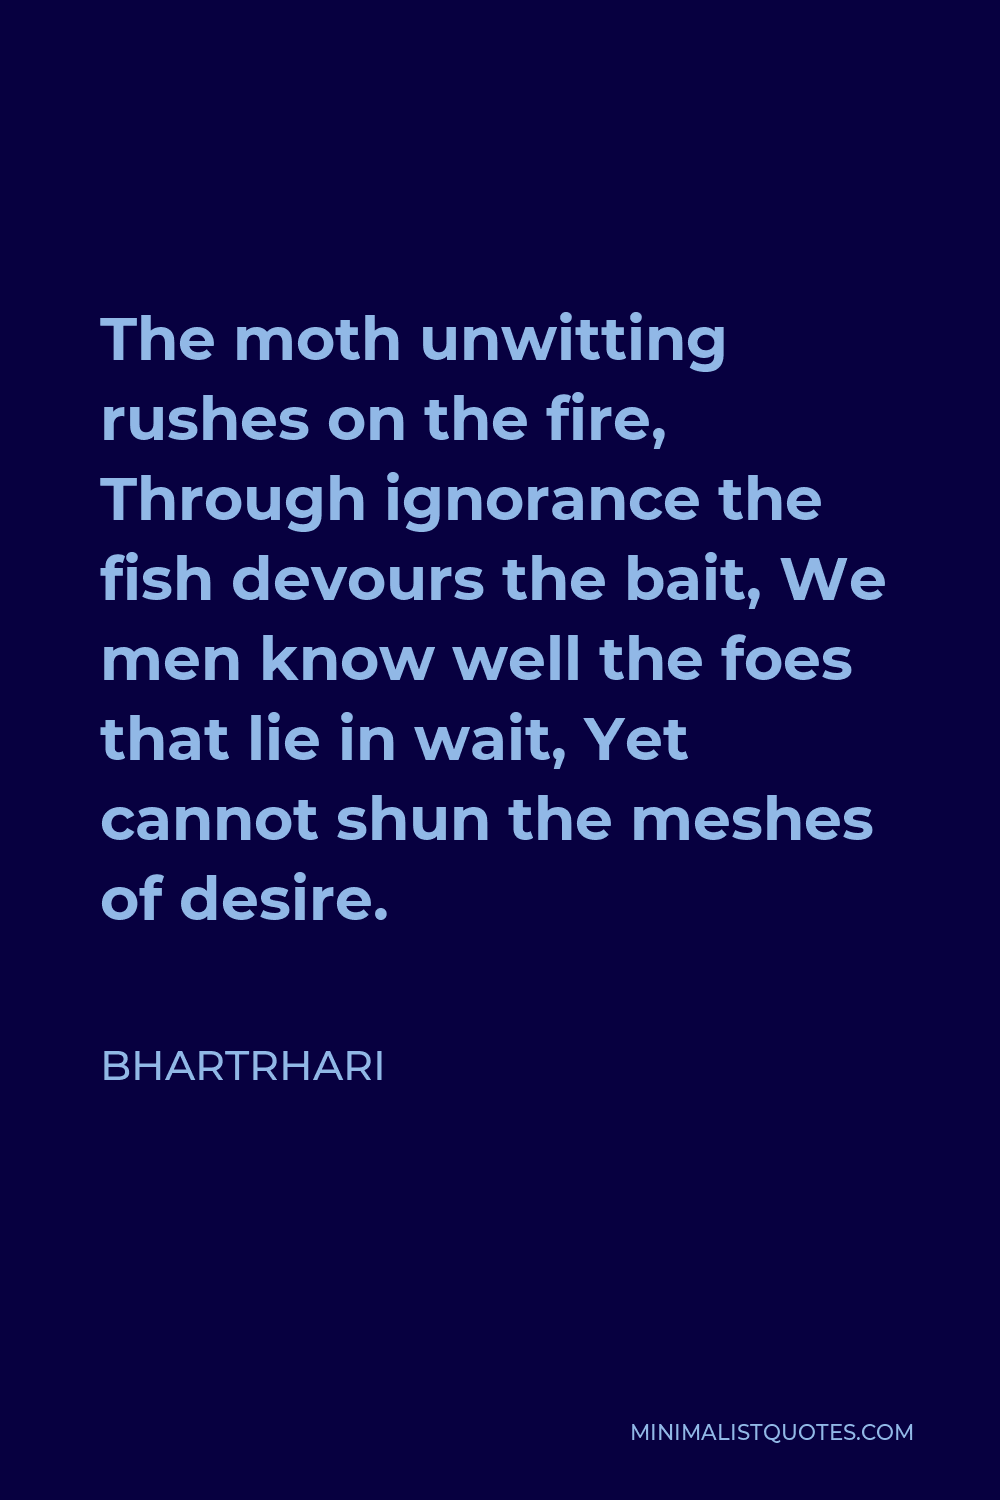 Bhartrhari Quote - The moth unwitting rushes on the fire, Through ignorance the fish devours the bait, We men know well the foes that lie in wait, Yet cannot shun the meshes of desire.